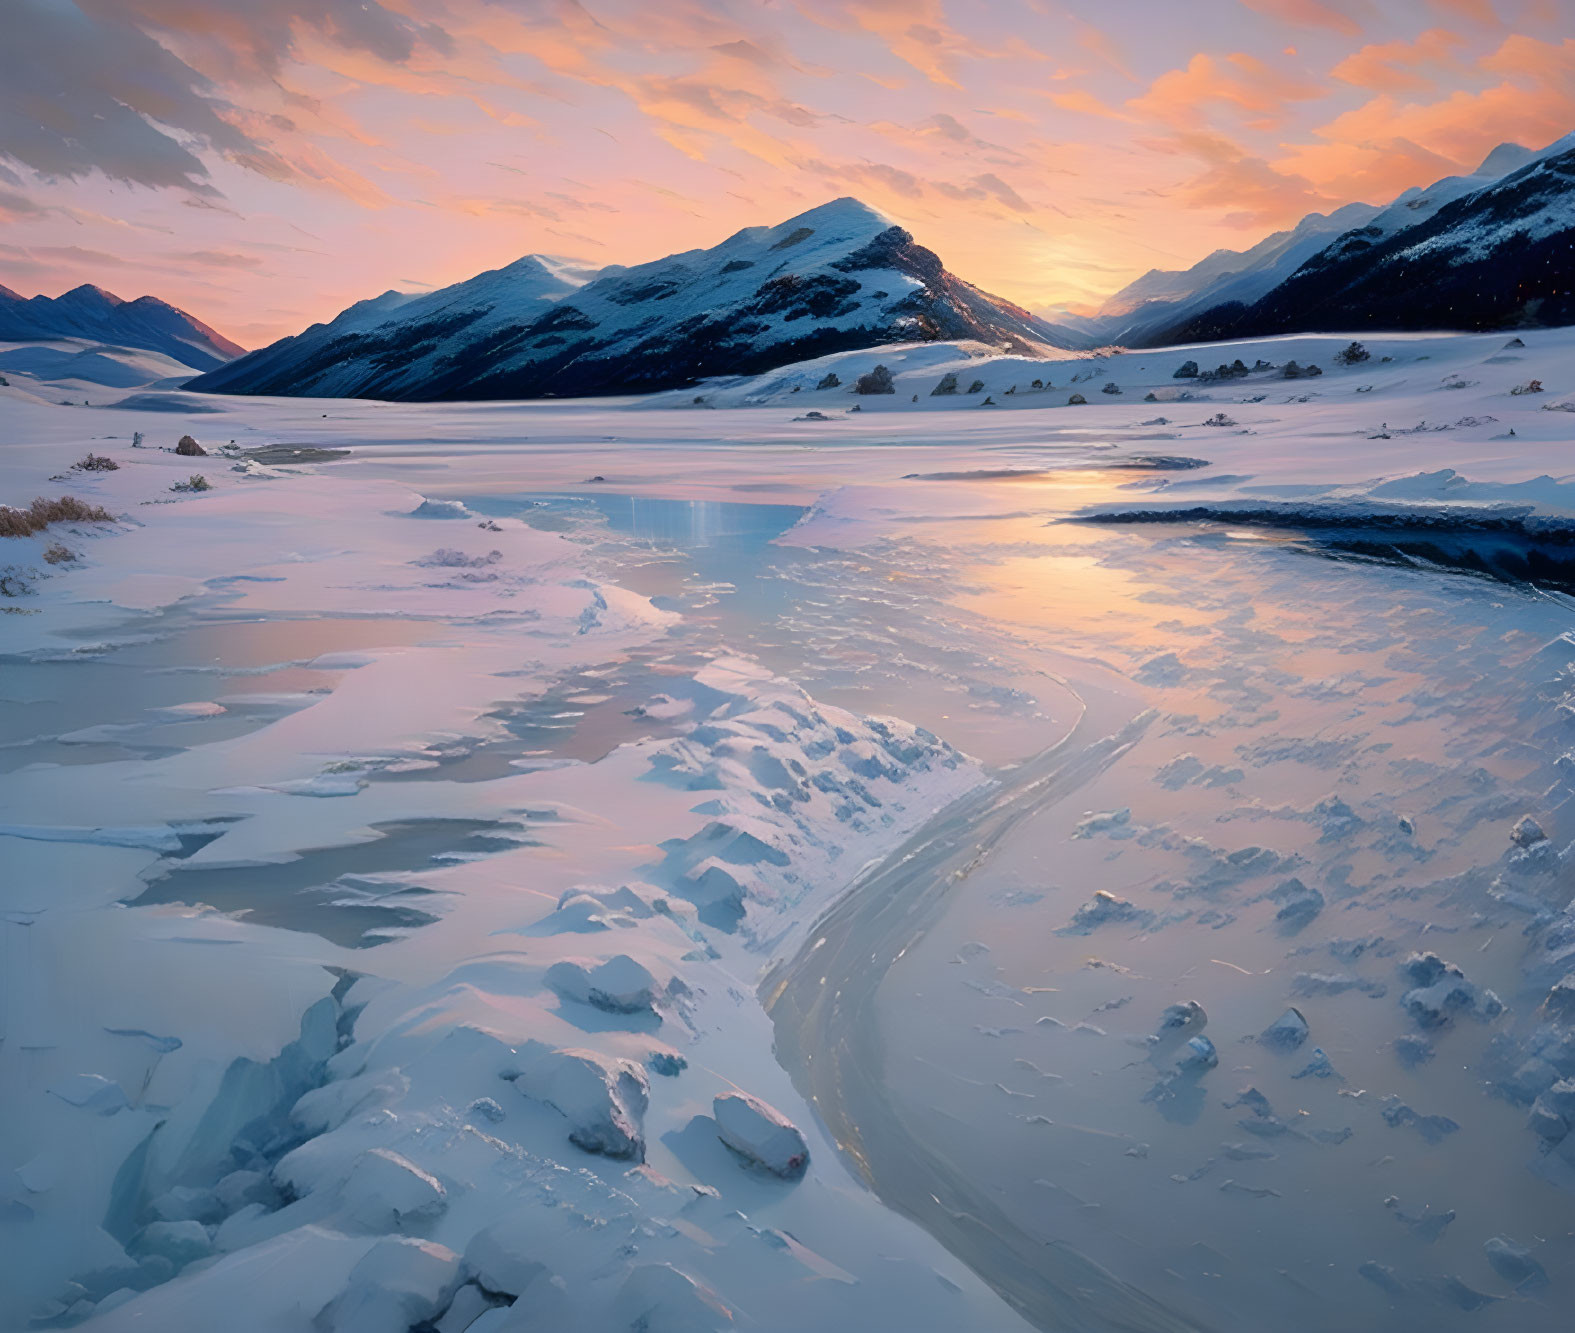 Snowy landscape at sunset: pink and orange skies, icy mountains, frozen river.